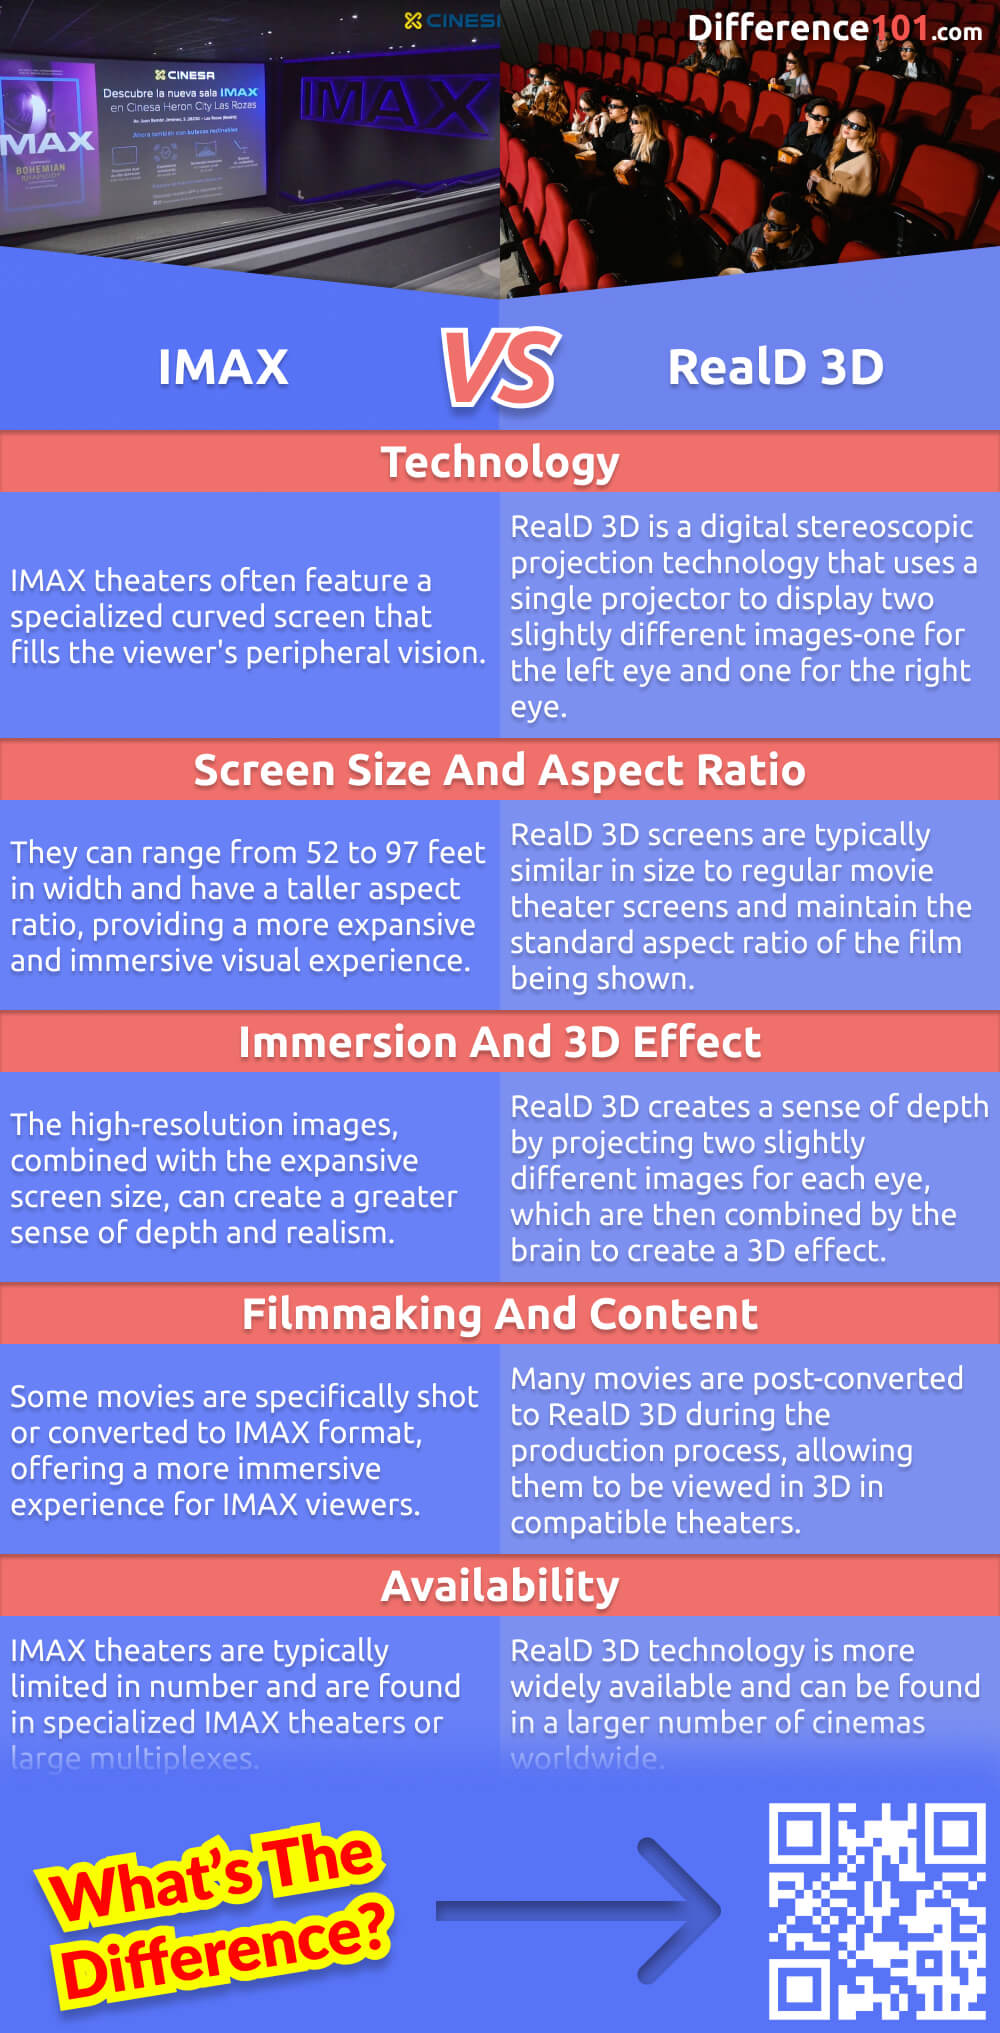 Do you know the difference between IMAX and RealD 3D? We'll explain the key differences between the two technologies, the pros and cons of each, so you can make a decision about which one is right for you.